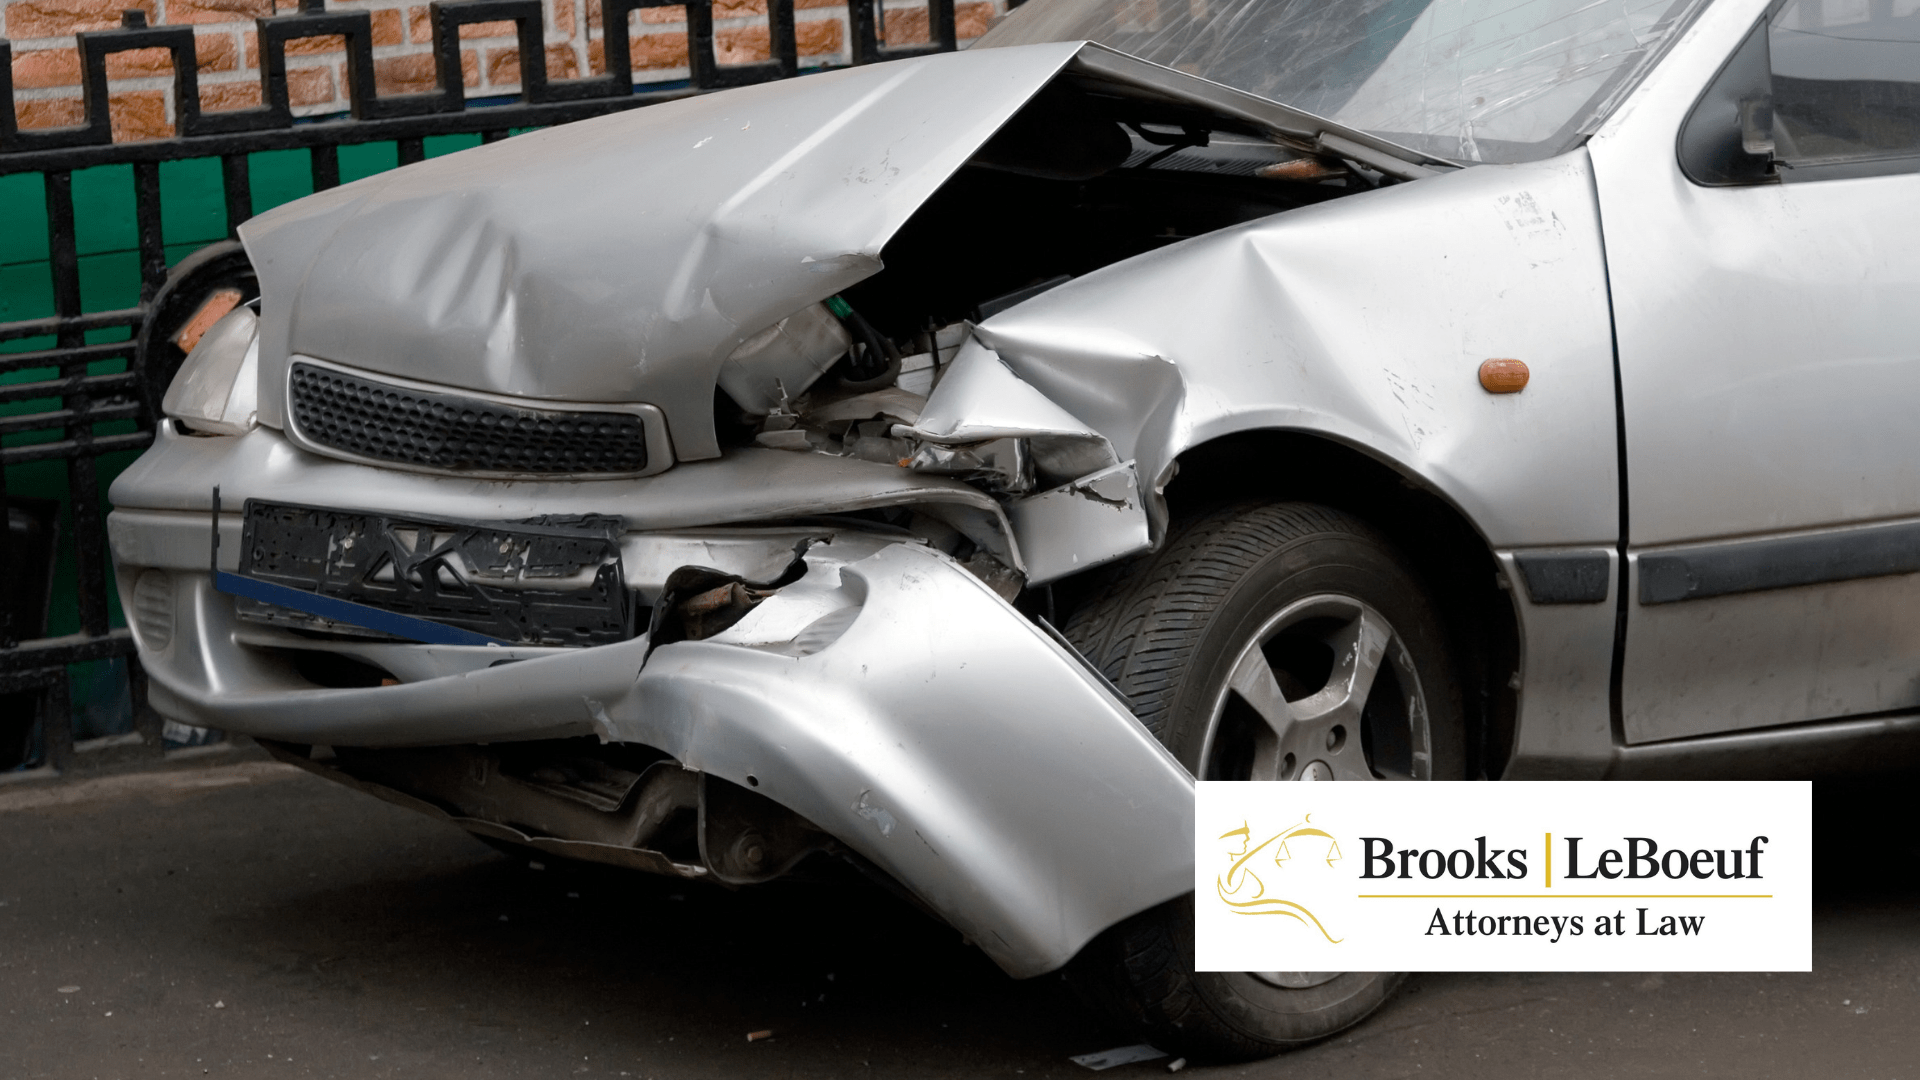 3 Factors That Can Lead to Car Accidents